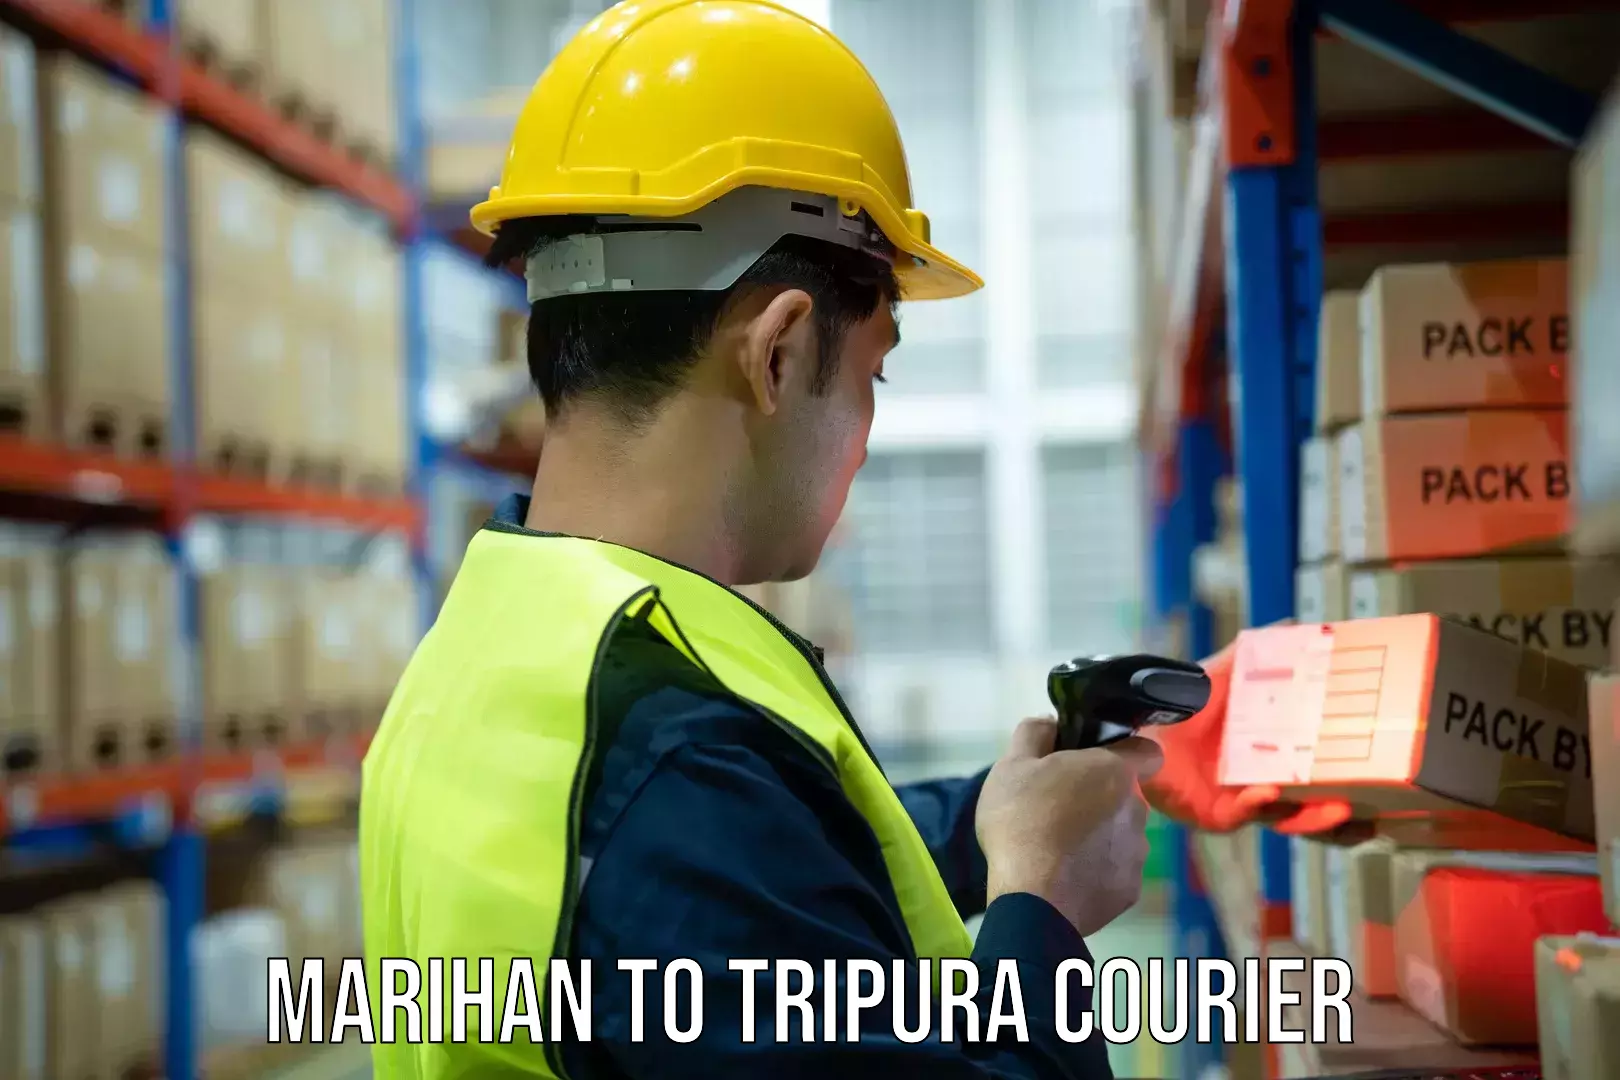 Reliable delivery network Marihan to Udaipur Tripura